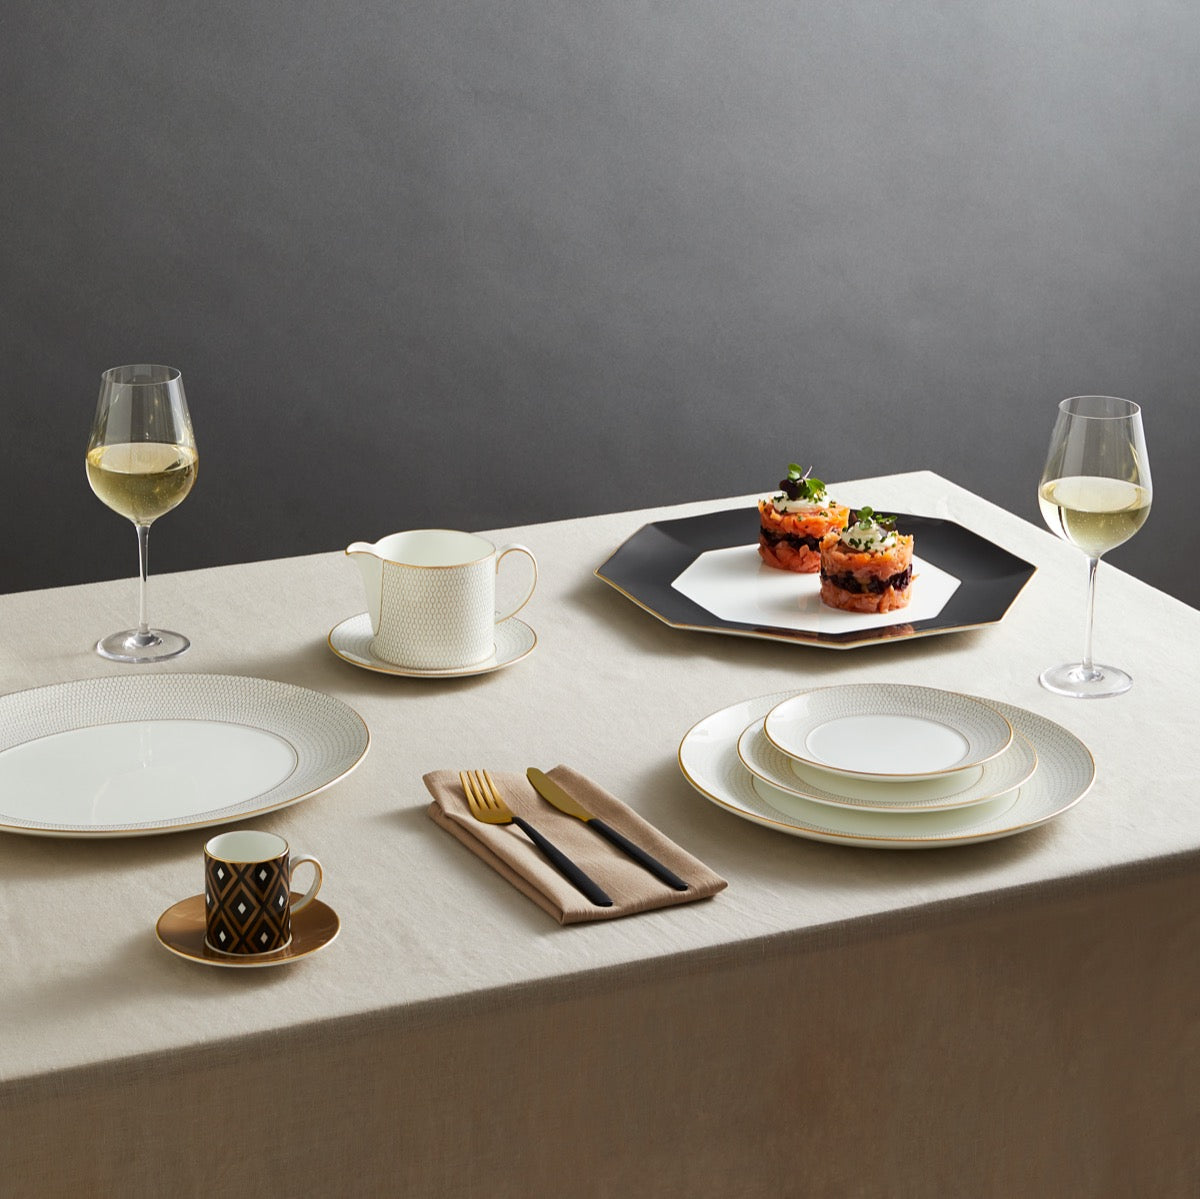 Gio Gold Dinner set from Wedgwood